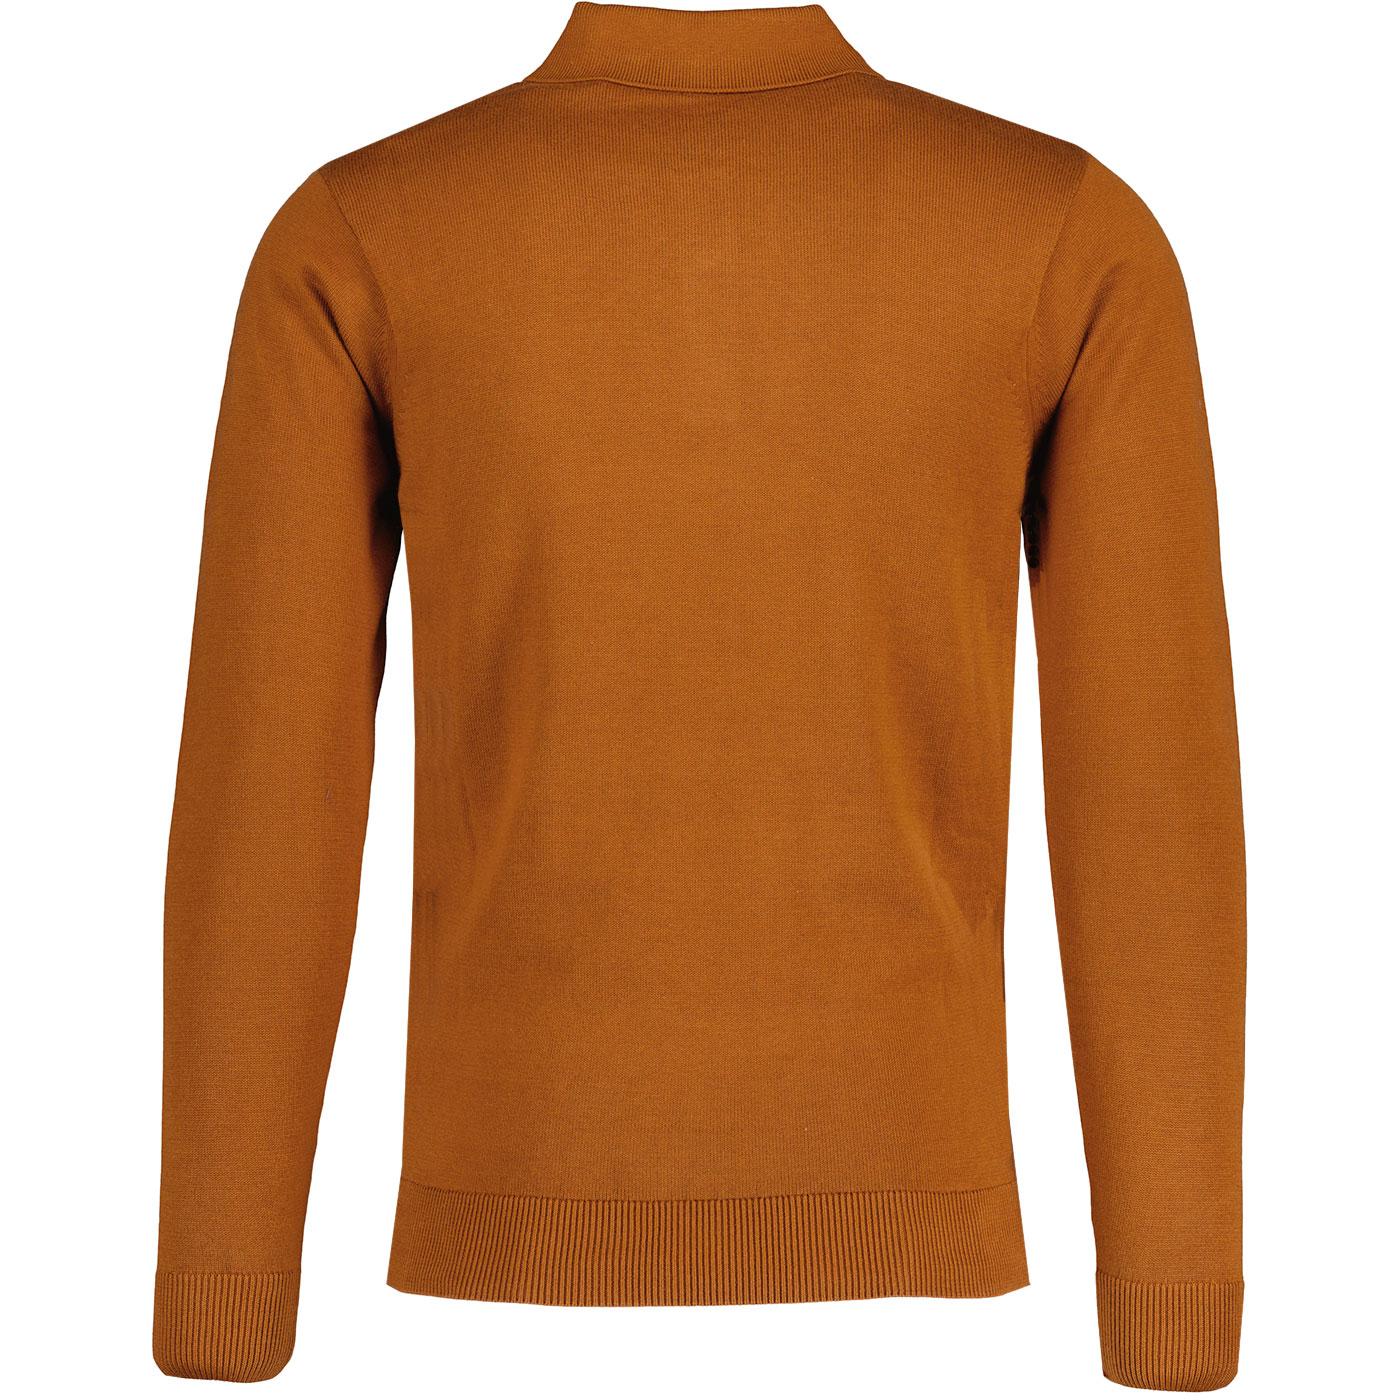 Gabicci Francesco Retro Long Sleeve Knitted Polo in Toffee